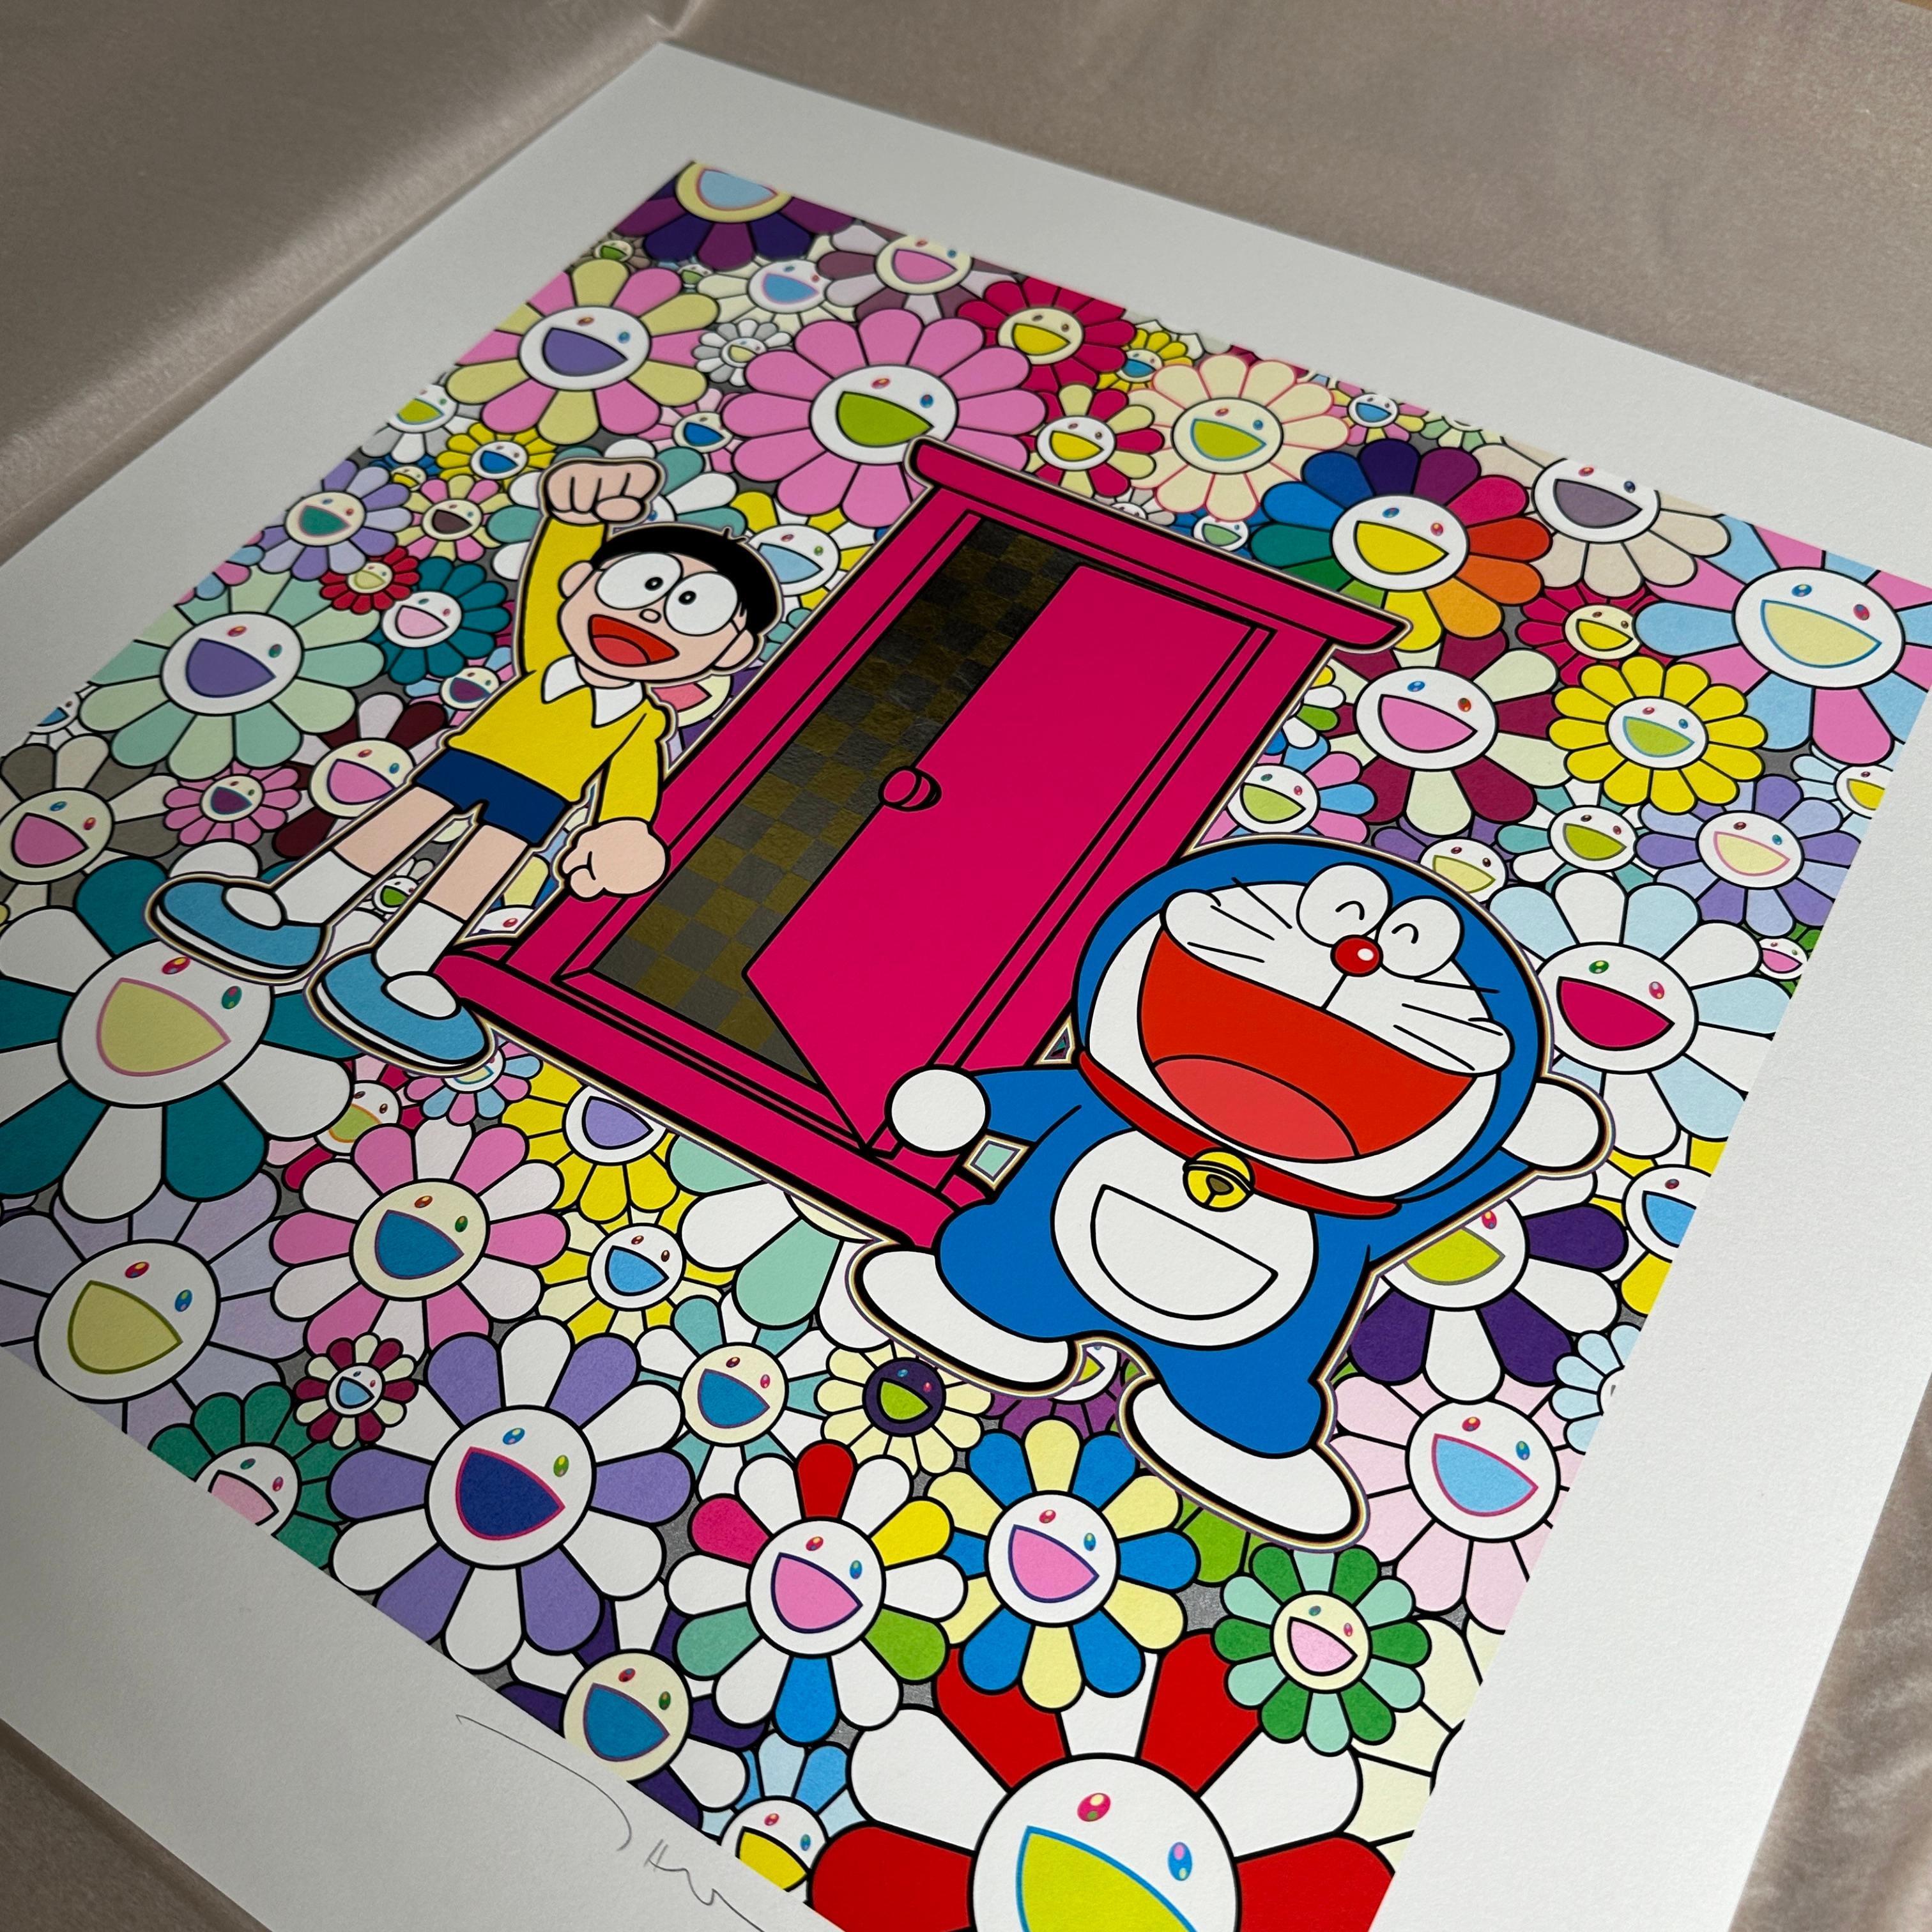 Artist: Takashi Murakami
Title: Nobita and Doraemon Amidst the Flowers
Year: 2023
Edition: 100
Size: 400 x 400mm (image size) / 500 x 500mm (sheet size)
Medium: Silkscreen with gold leaf and platinum leaf

This is hand signed by Takashi